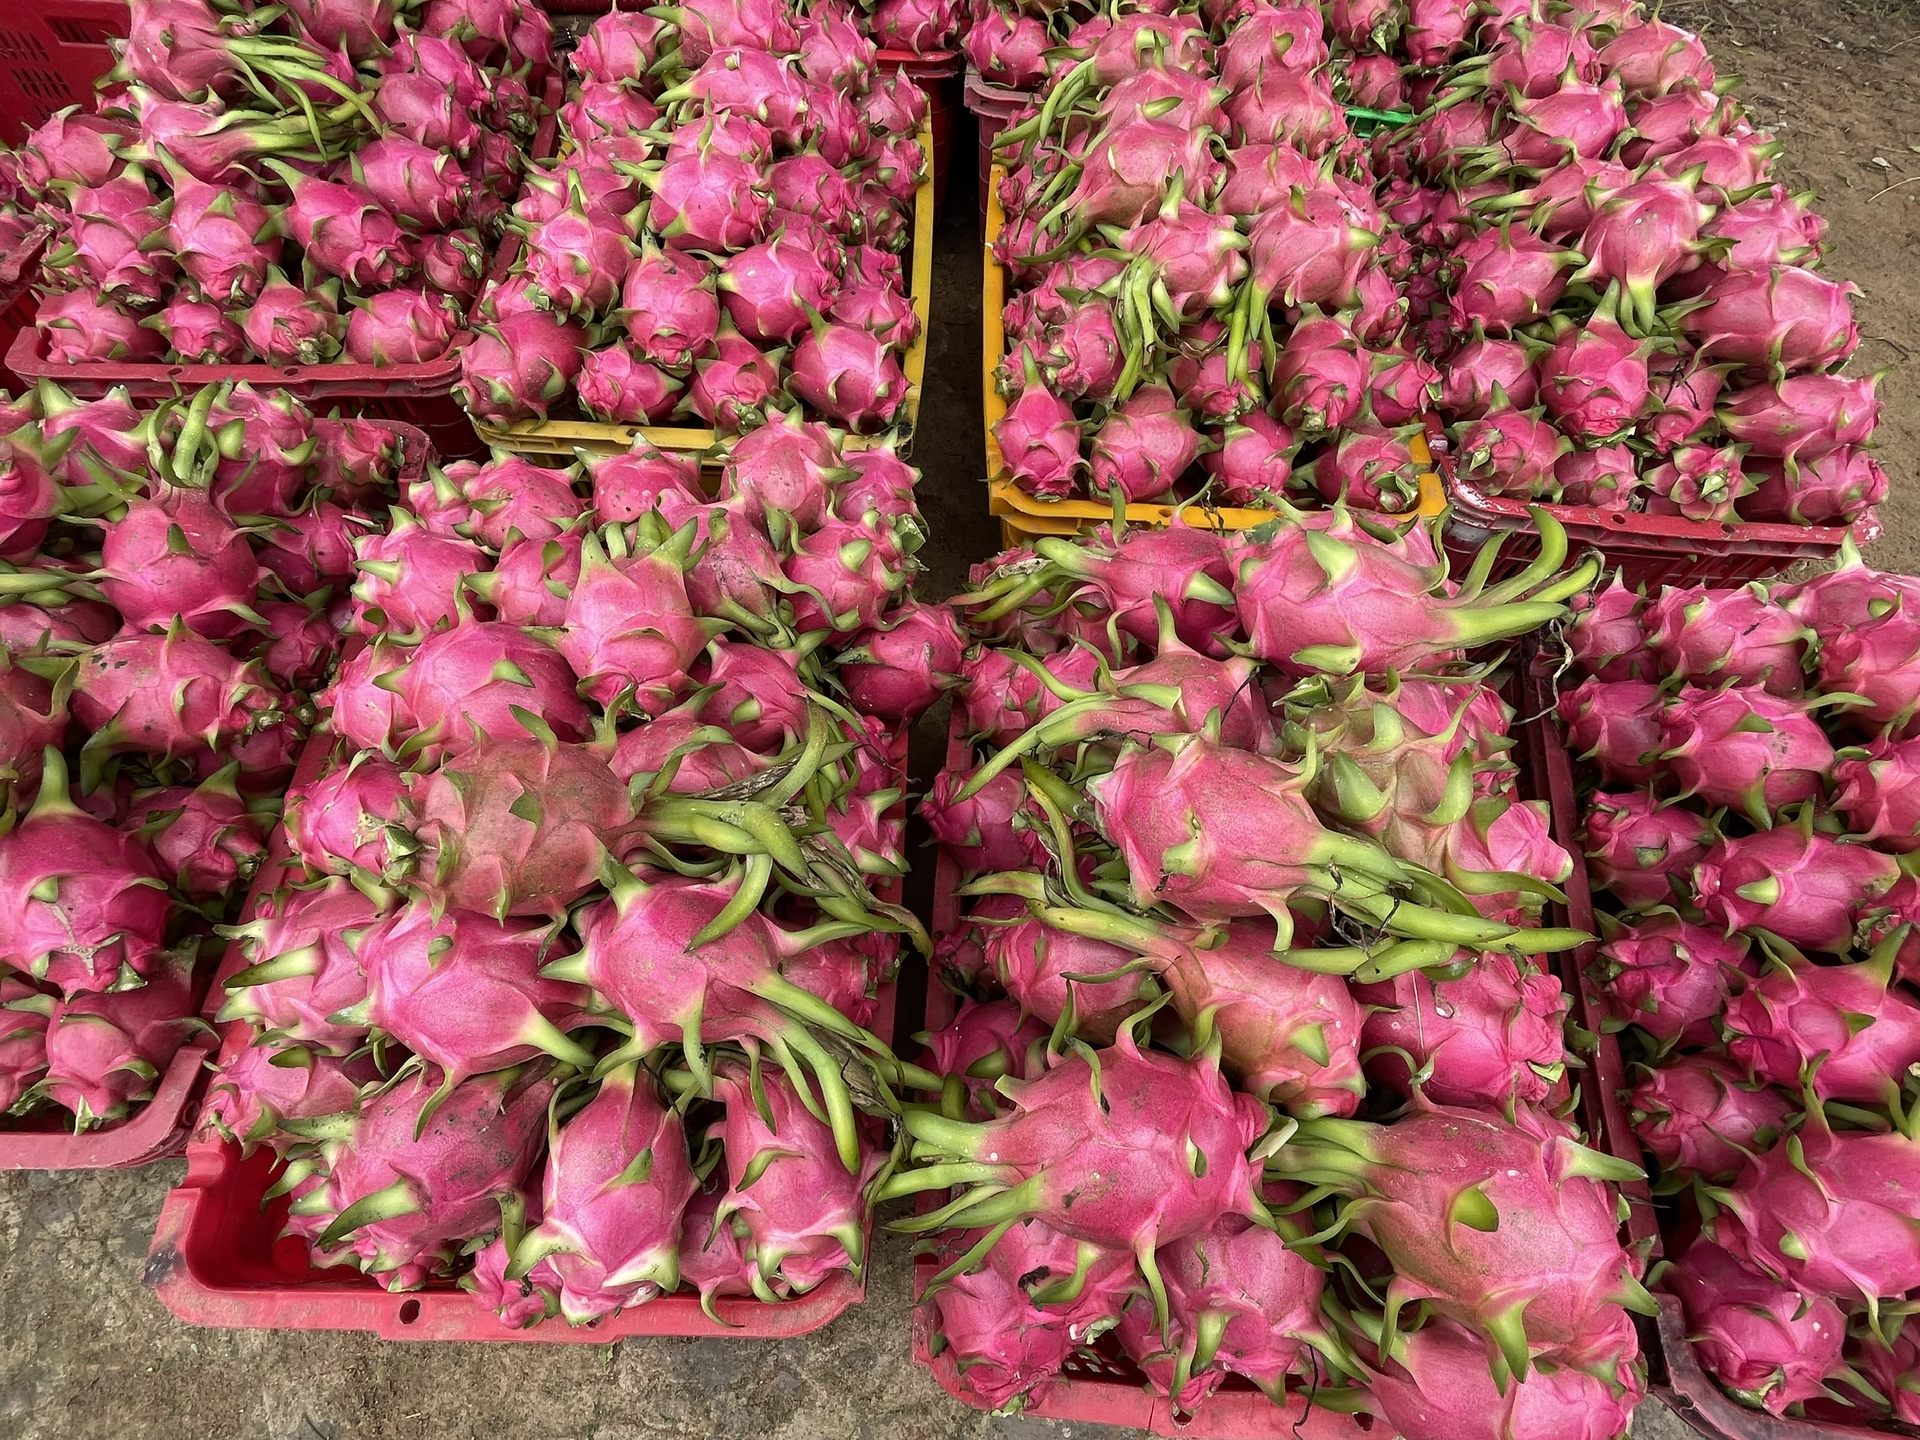 It is imperative to elevate product quality to foster the sustainable growth and expansion of the dragon fruit sector. Photo: M.P.